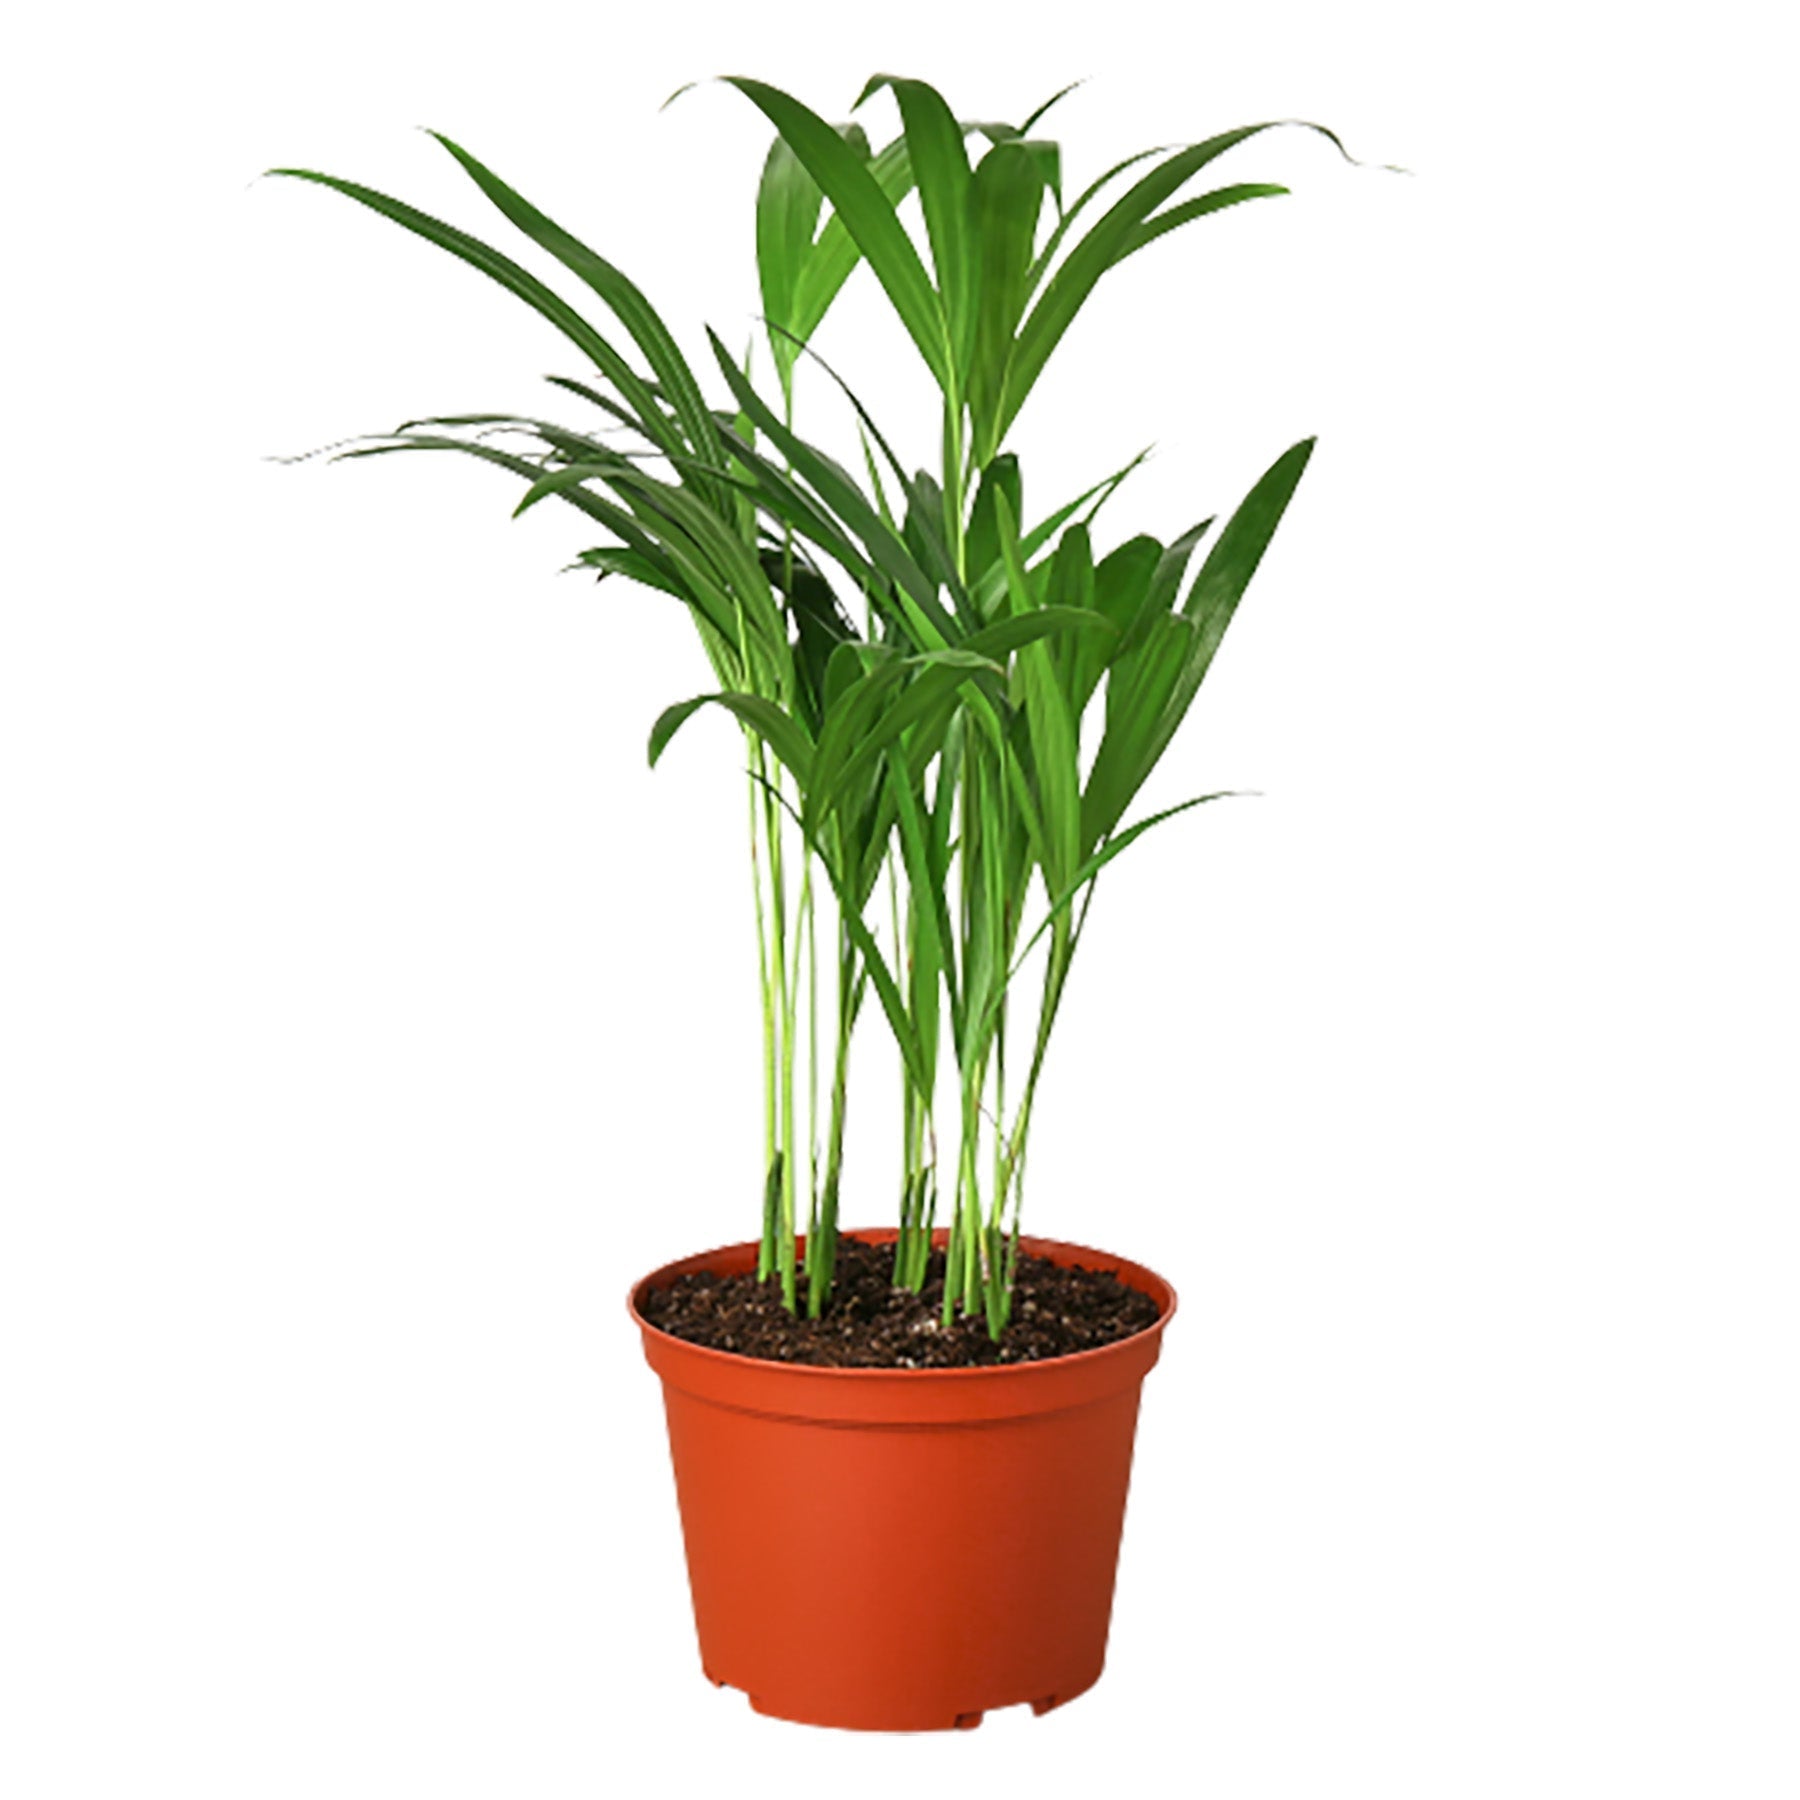 A plant in a red pot on a white background from one of the top plant nurseries near me.